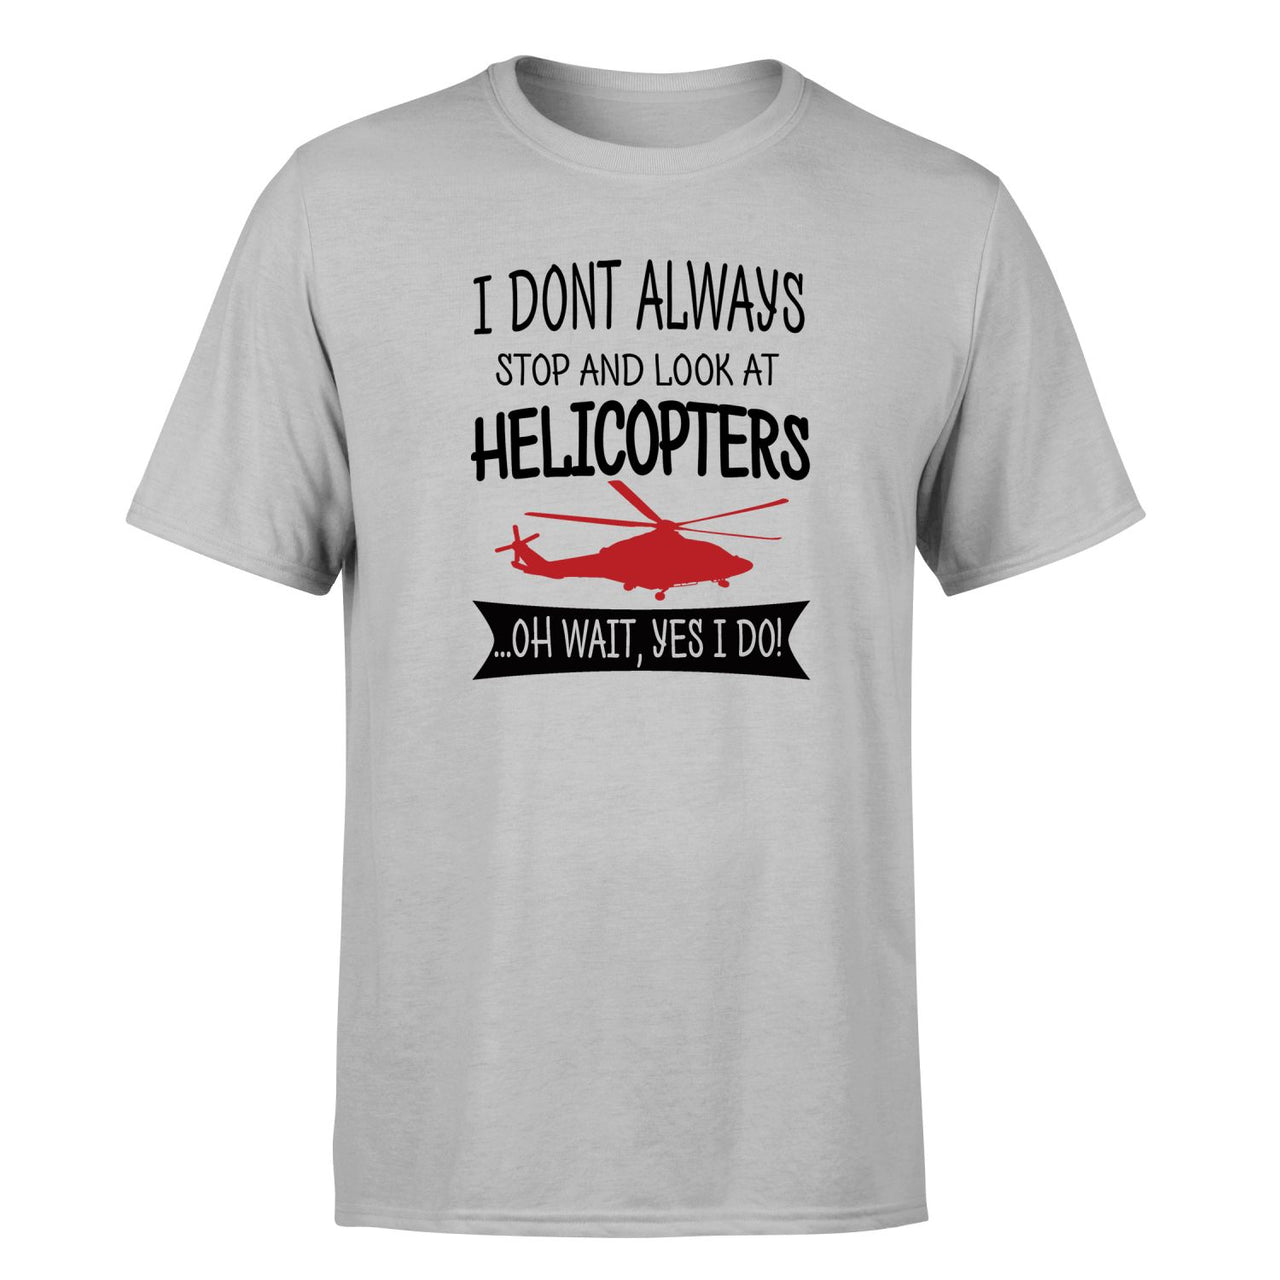 I Don't Always Stop and Look at Helicopters Designed T-Shirts